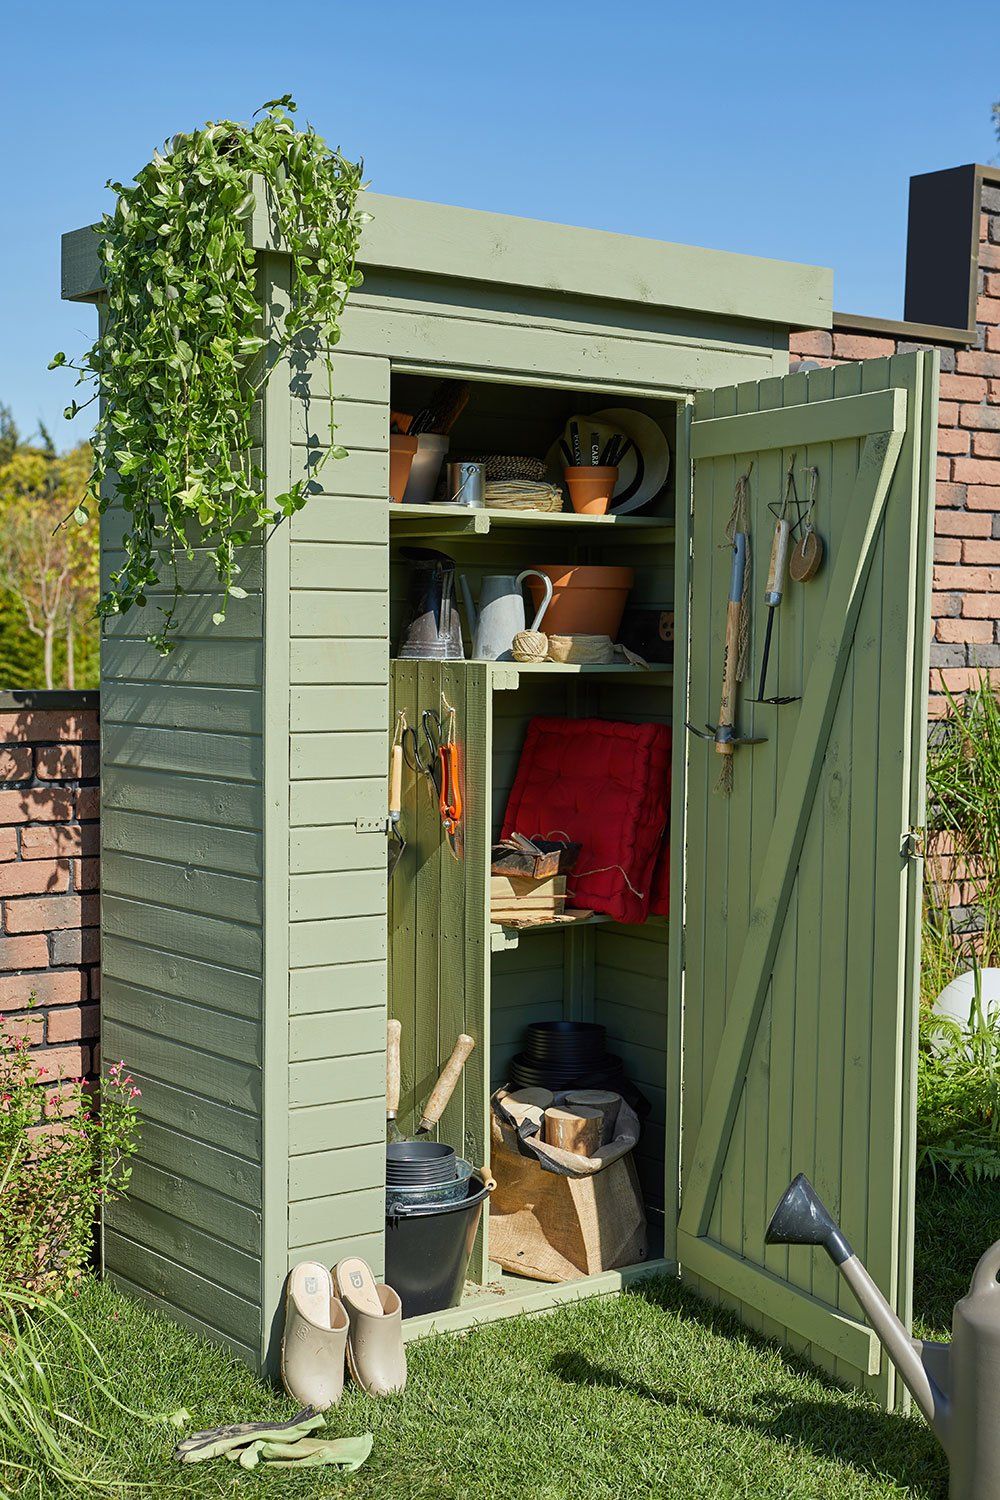 Compact Solutions for Storing Garden Tools and Supplies